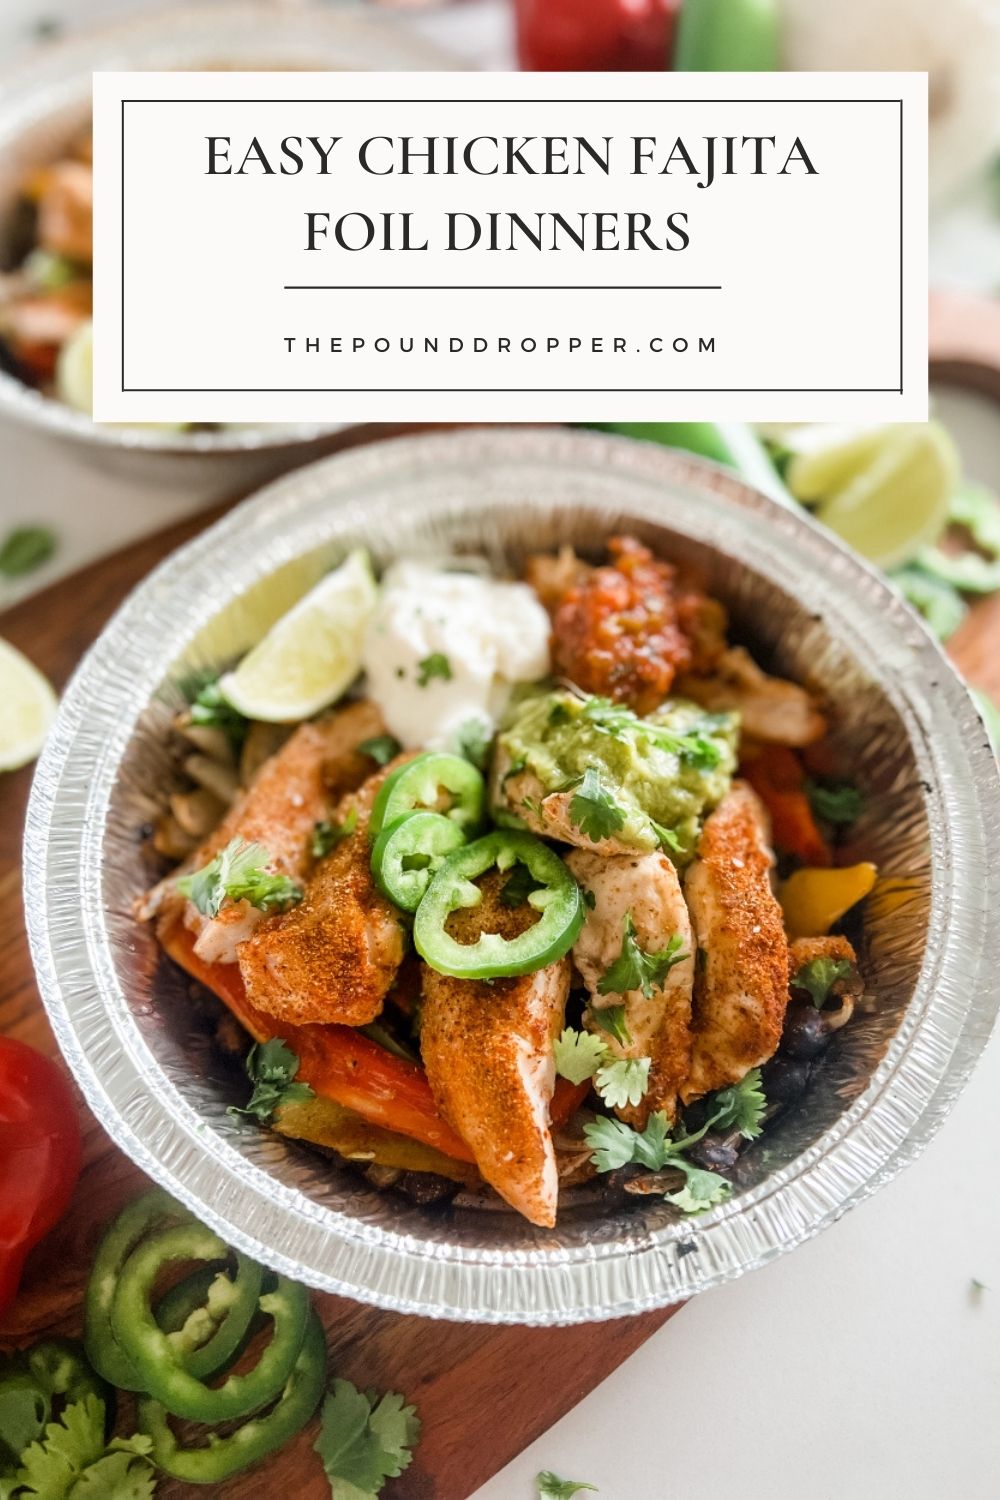 Easy Chicken Fajita Foil Dinners are one of our favorite meals! They're super flavorful, super simple and super delicious!!  They make for a quick and easy clean up-and a perfect easy weeknight meal! via @pounddropper